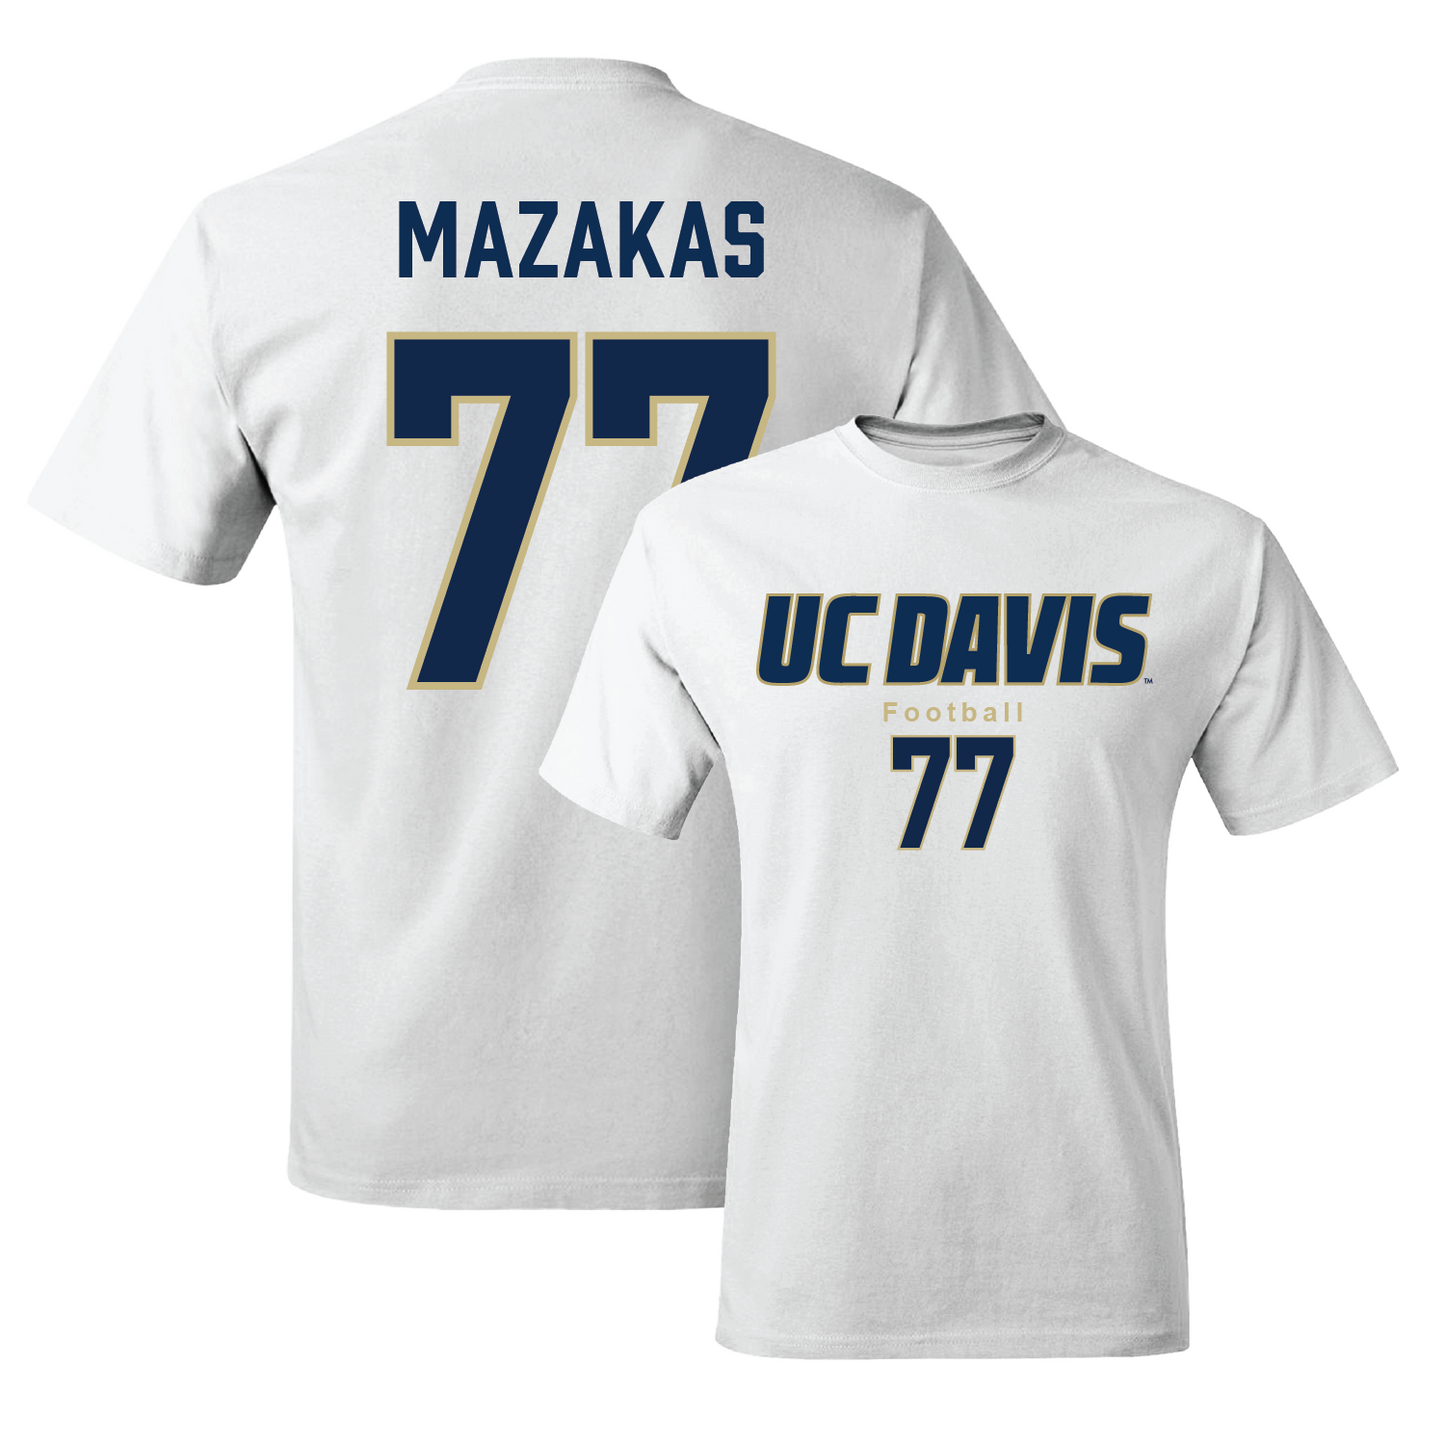 White Football Classic Comfort Colors Tee 4 Youth Small / Ty Mazakas | #77